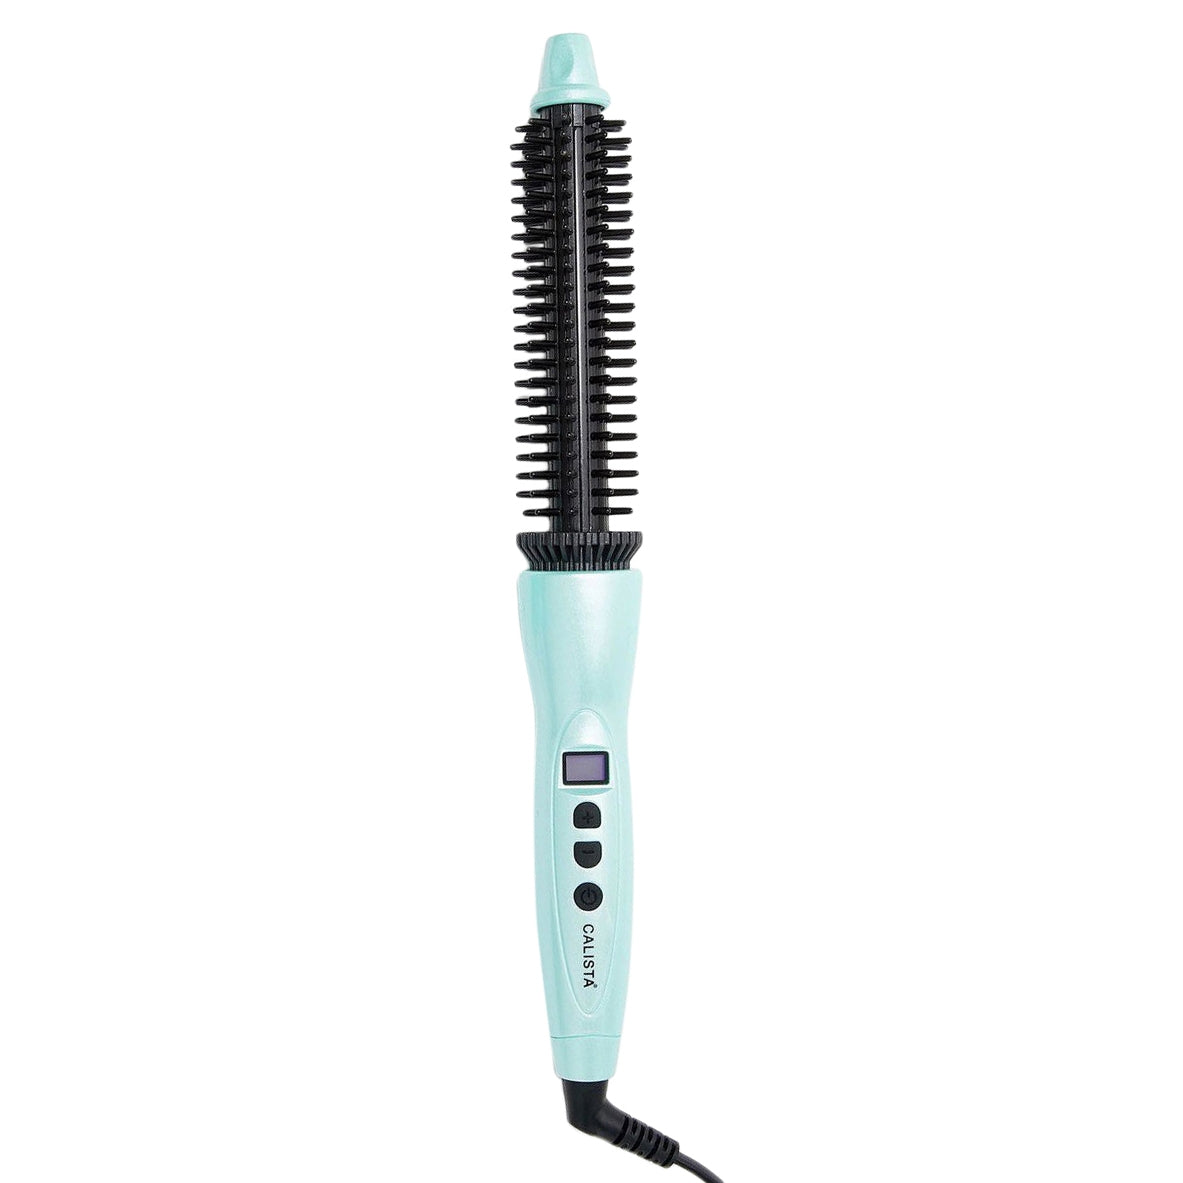 Calista Perfecter Pro Grip Heated Round Brush / Turquoise / 1 Inch